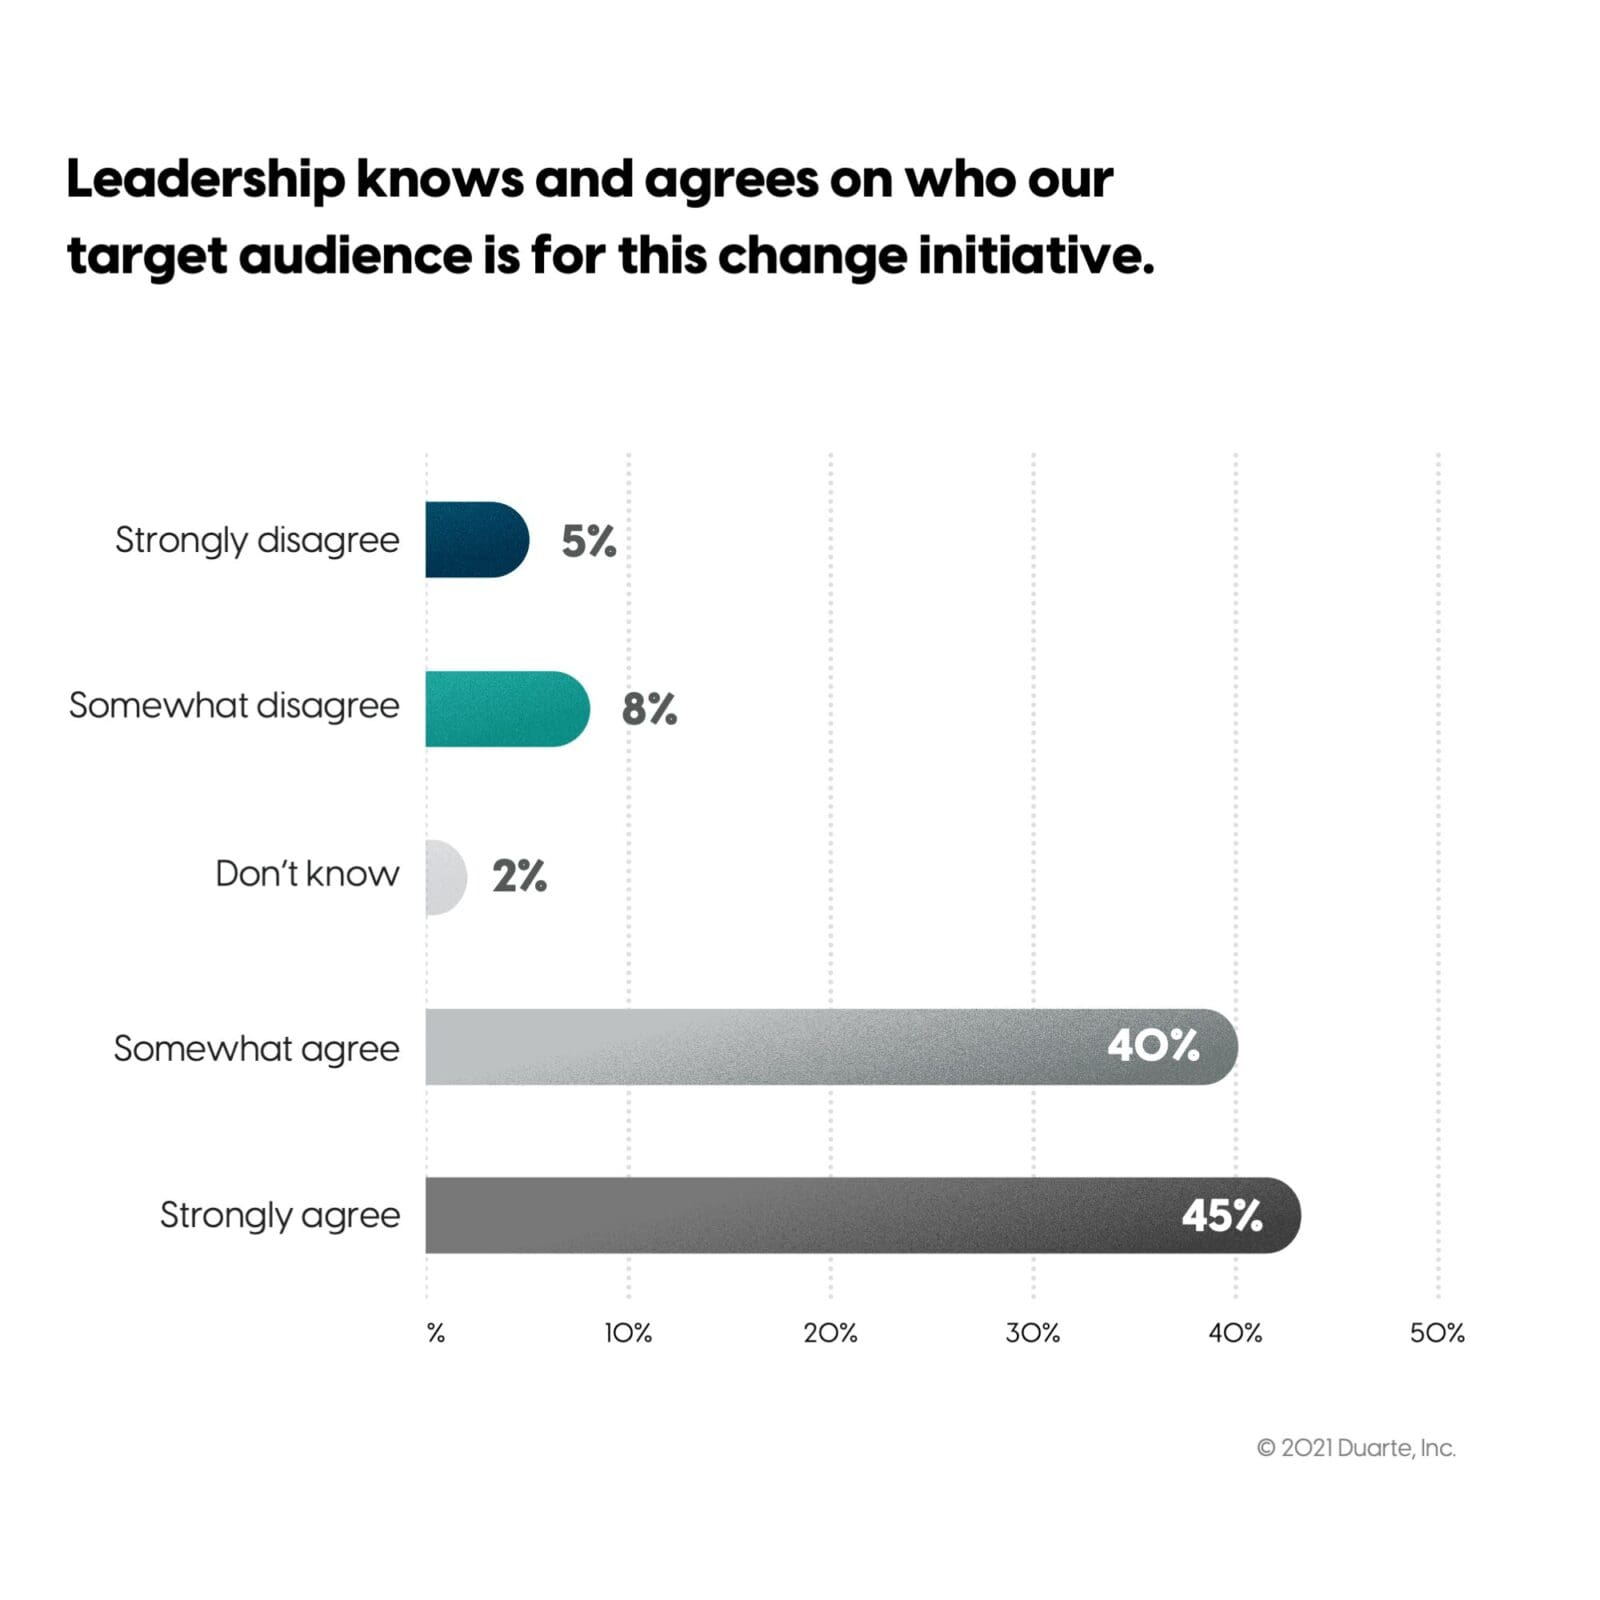 Survey results for question: Leadership knows and agrees on who our target audience is for this change initiative. Majority (45%) said they "Strongly agree."